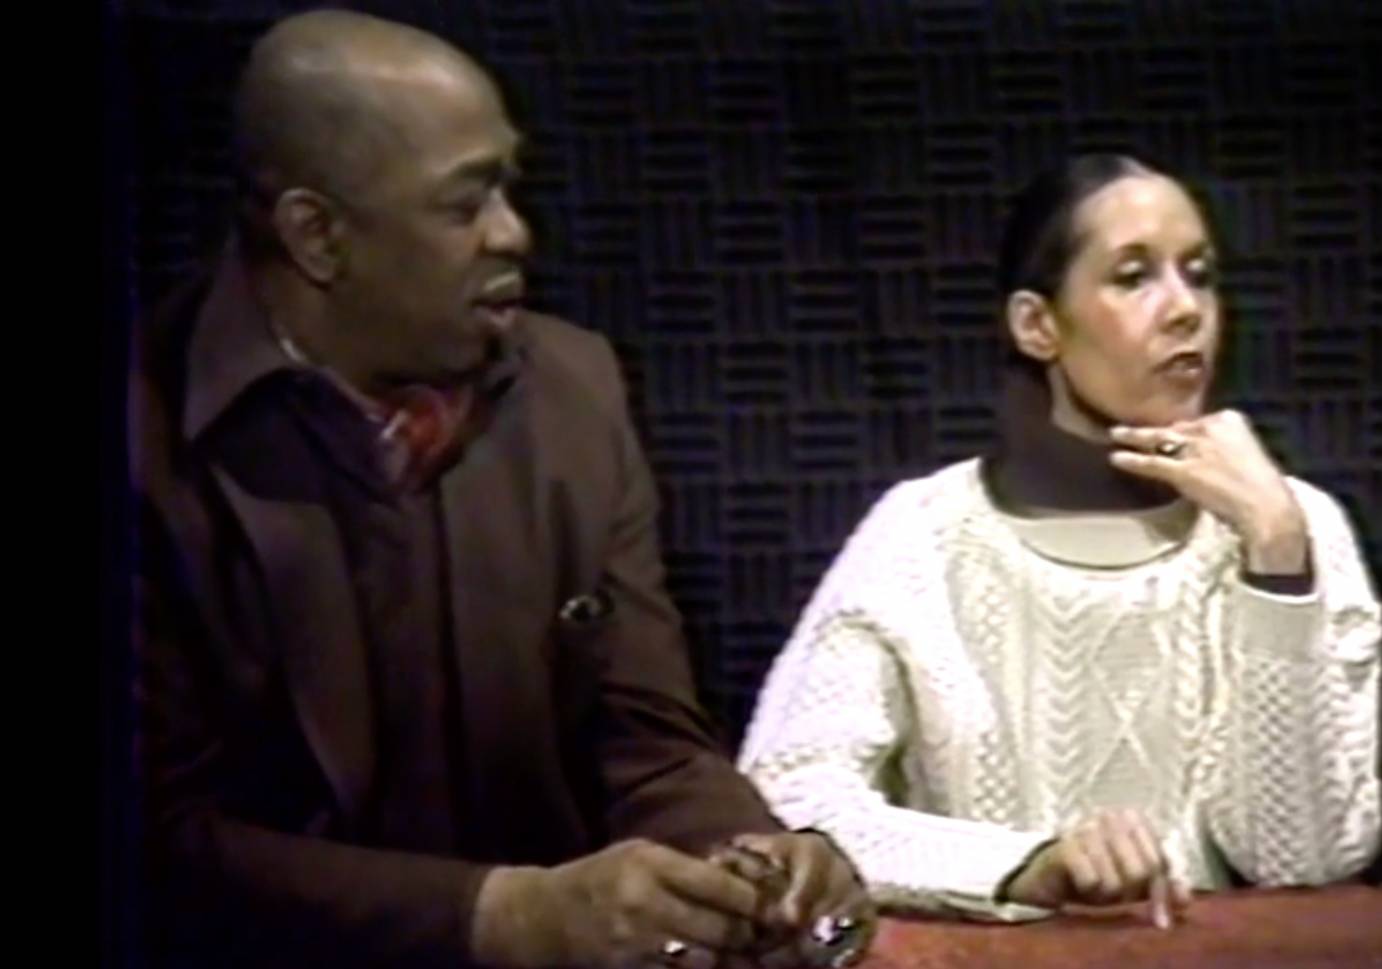 a legendary team Geofferey Holder, a dark colored, man in a brown suit, with a mulitcolored ascot, and Carmen De Lavallade his wife, a carmel colored woman with black hair tied back in a ponytail, wearing a brown turtle-neck under a white woolen sweater, chat